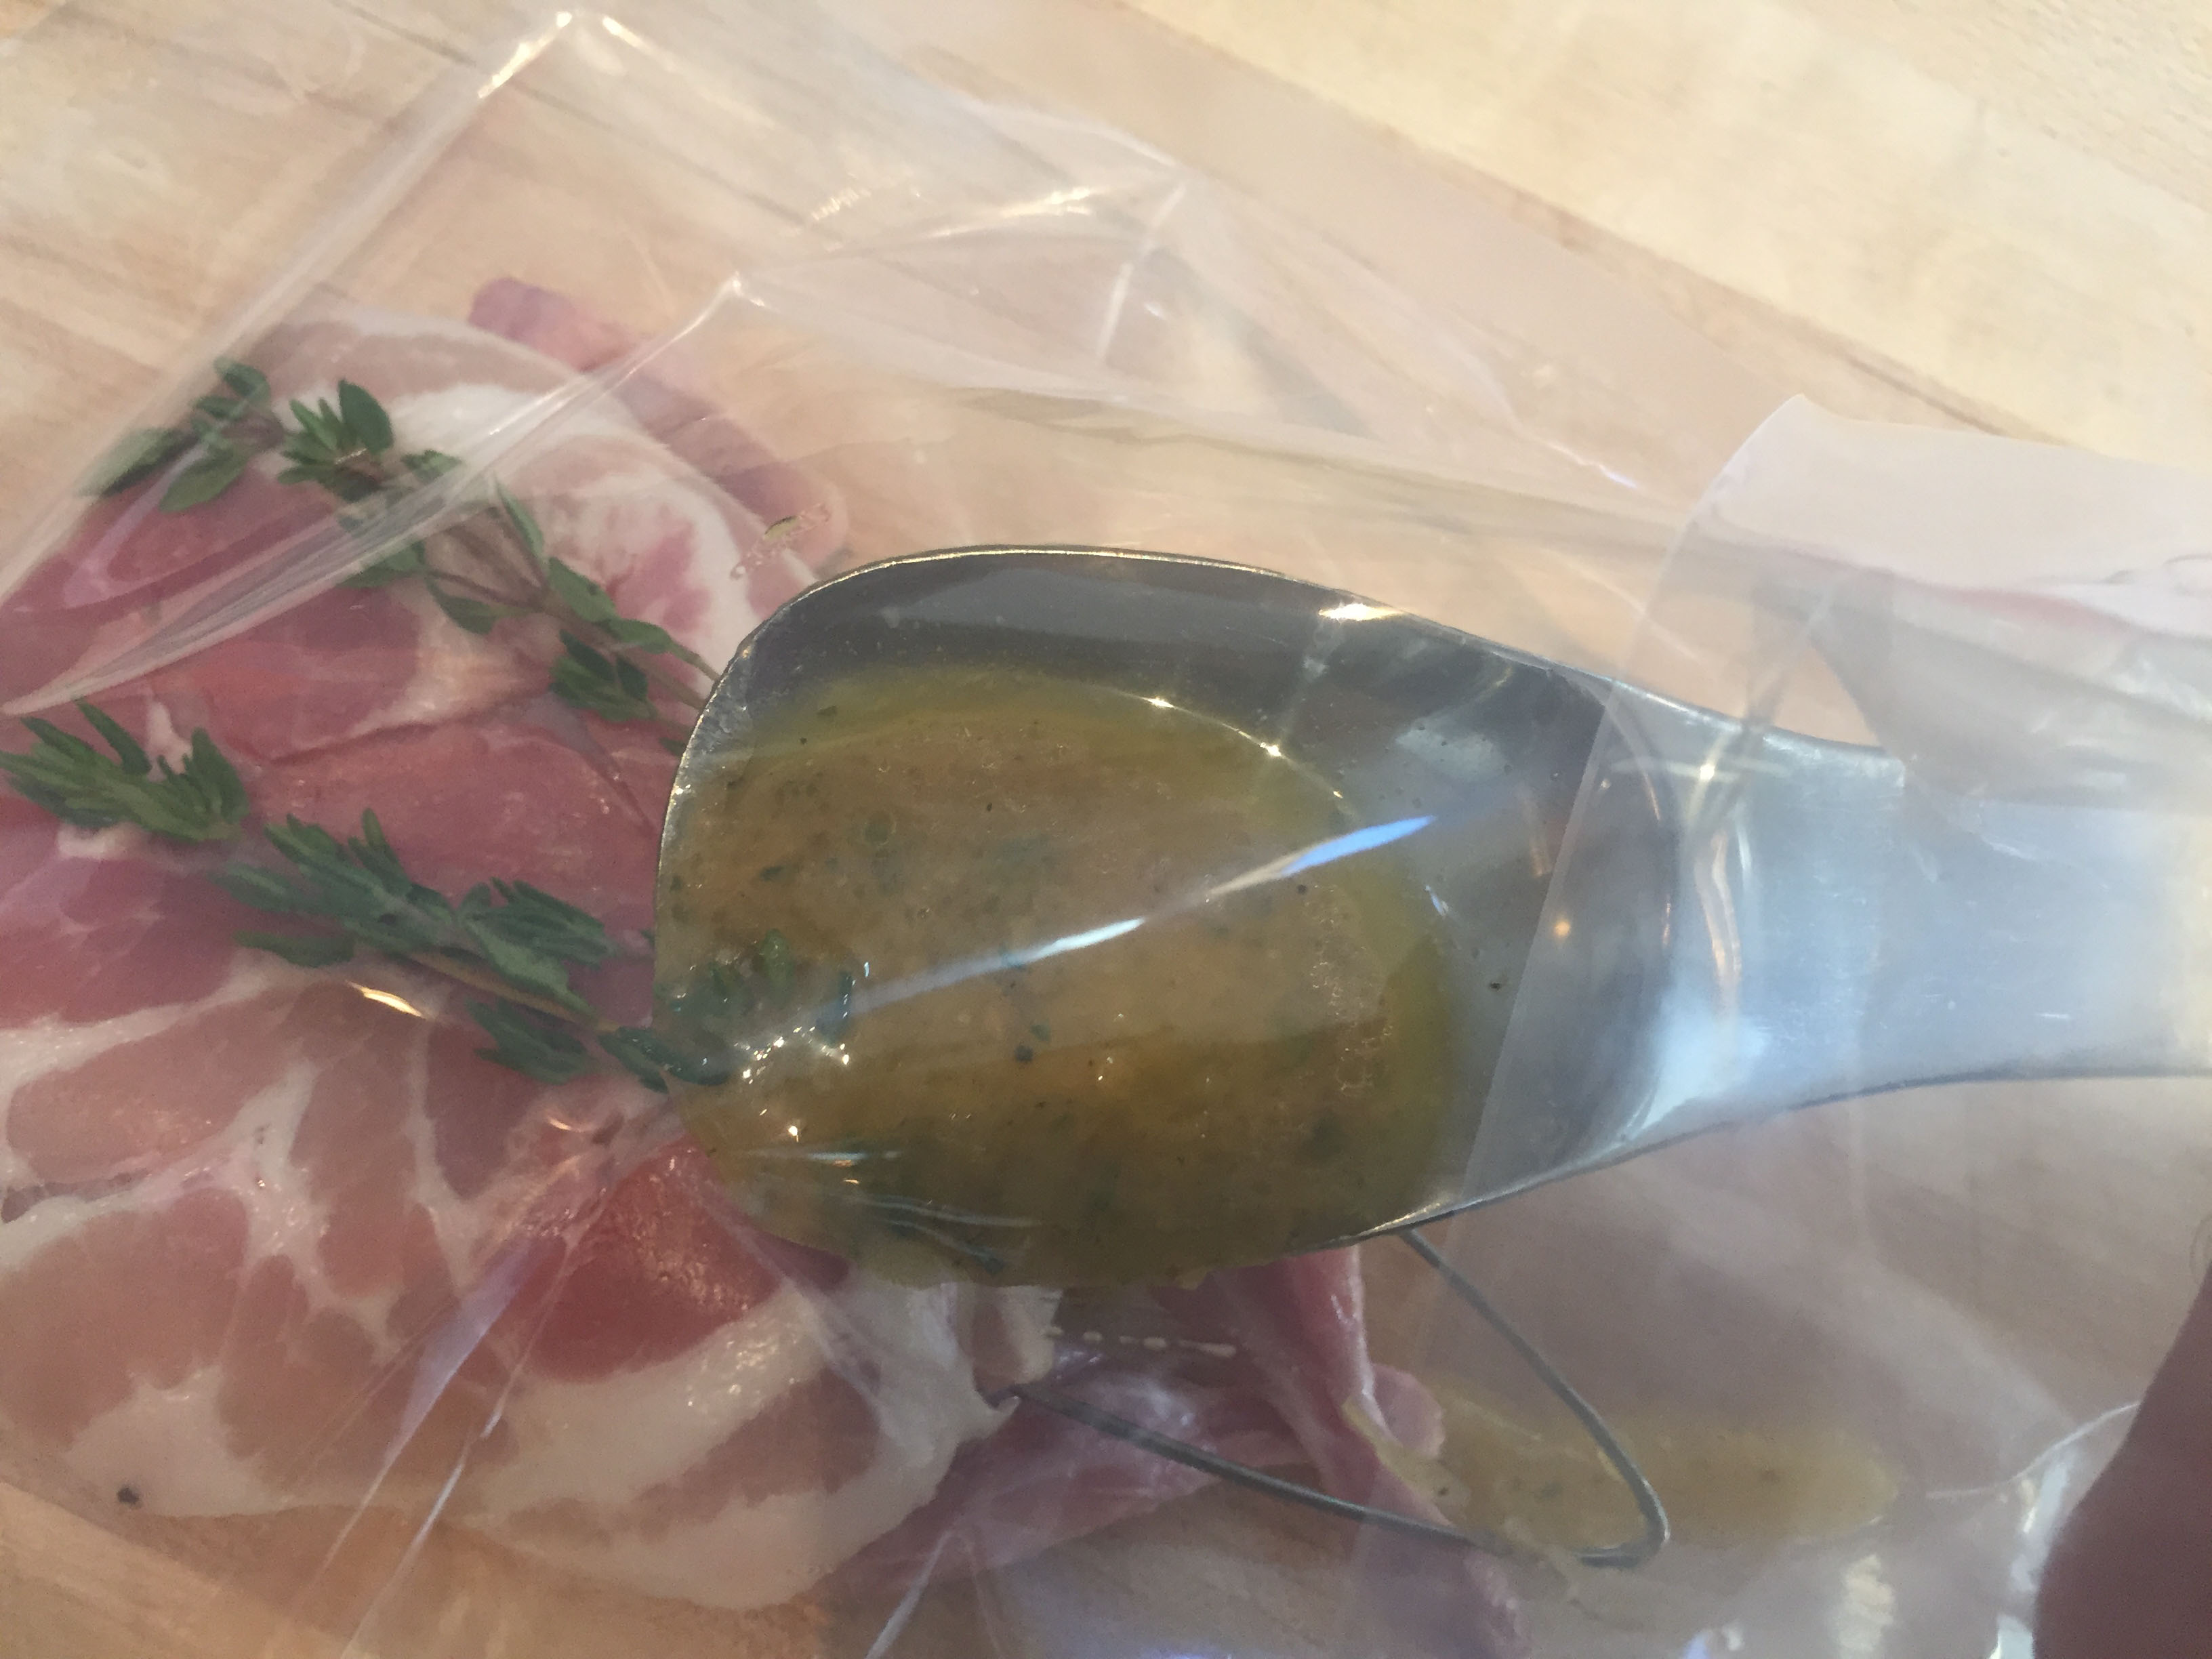 adding marinade to meat in vacuum bag